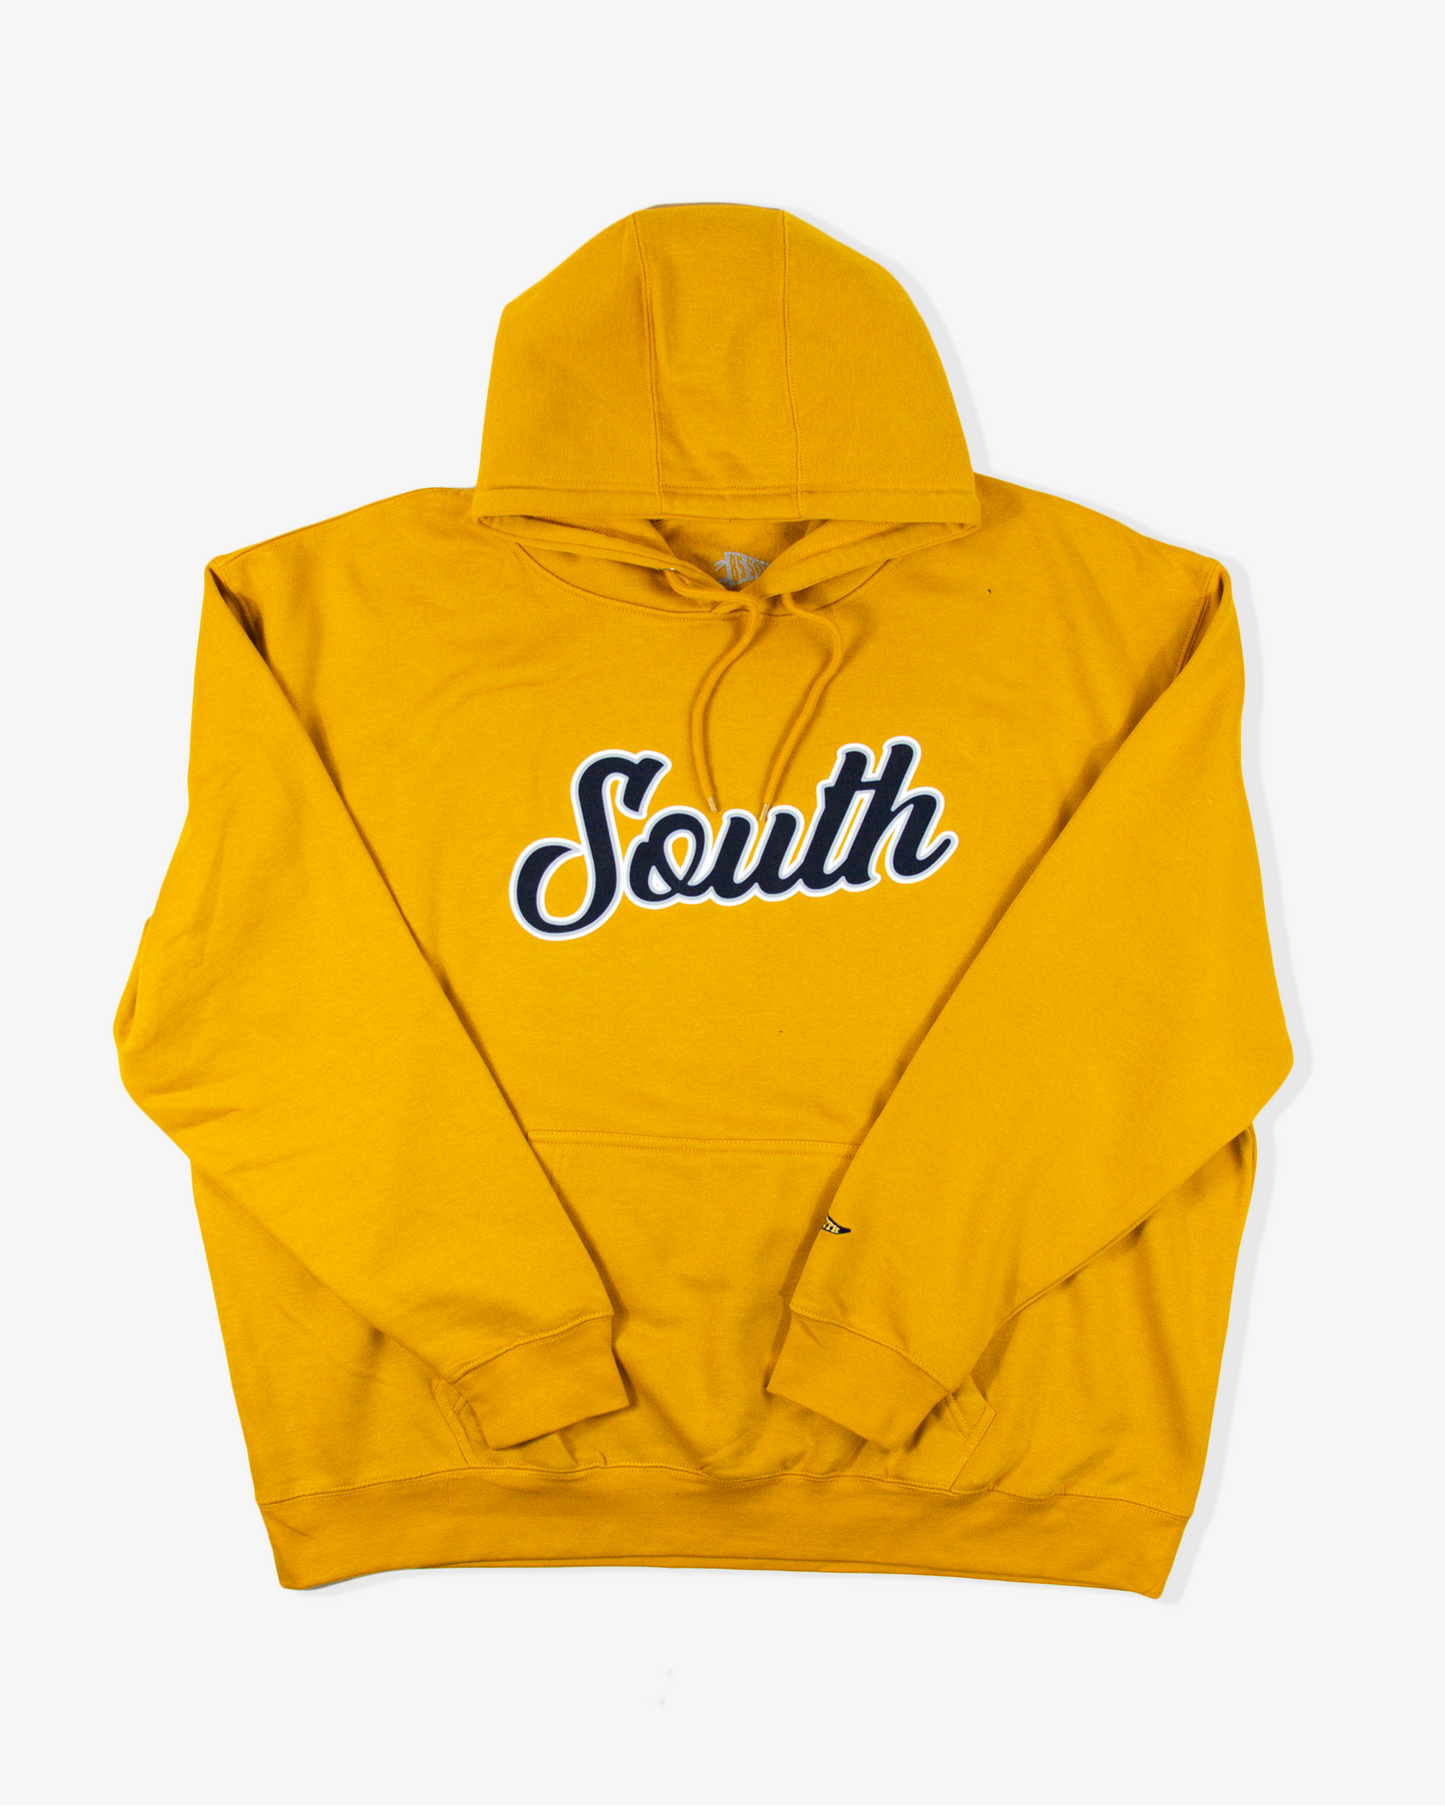 City Edition South Script Hoodie-Indianapolis